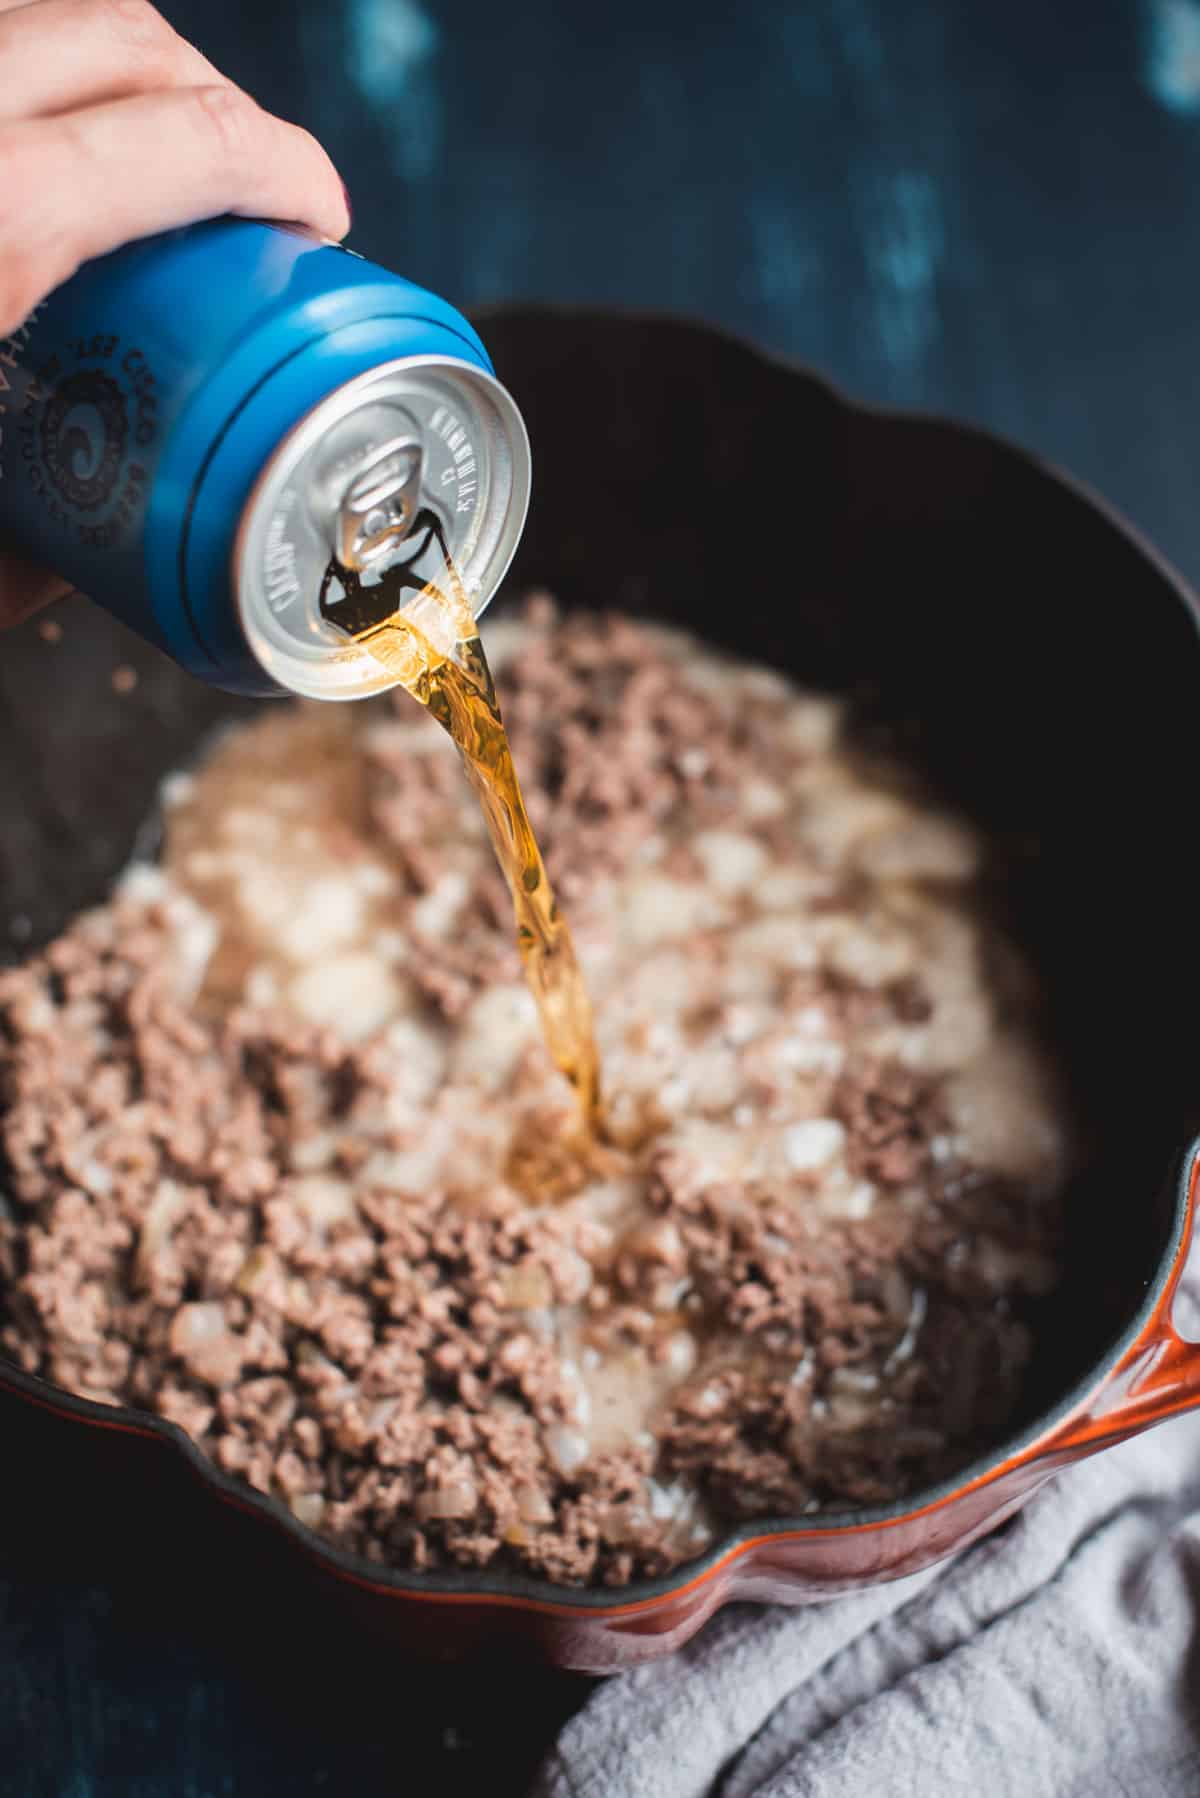 A can of beer is being poured into the beef and onion mixture sitting inside the pumpkin shaped pot on the burner.